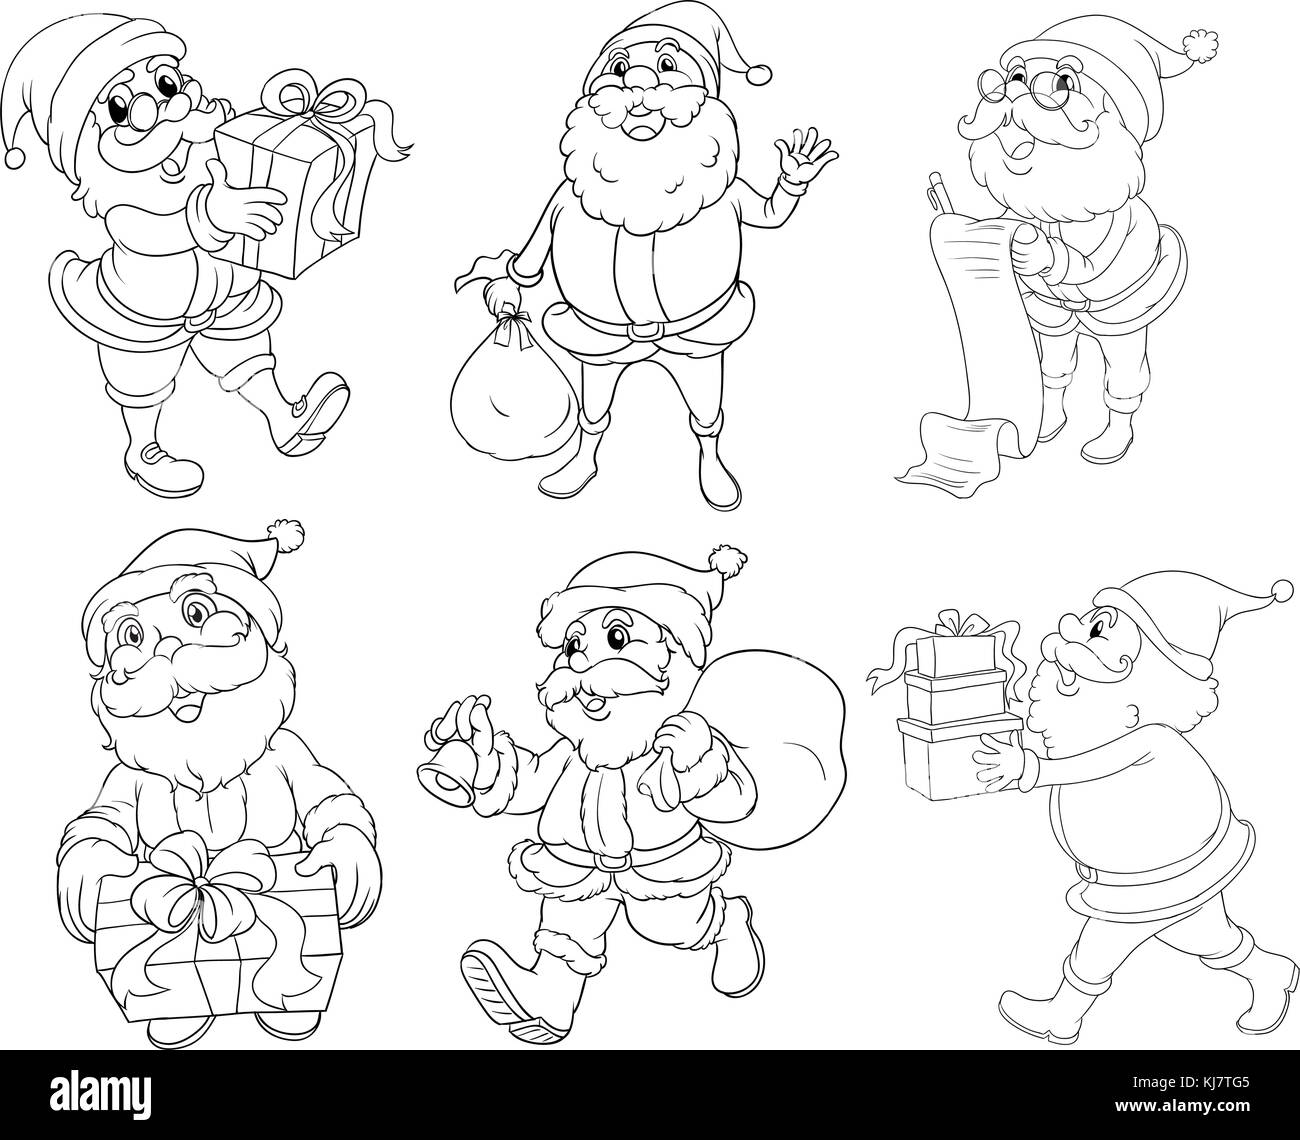 Illustration of the different drawings of Santa Claus giving gifts on a white background Stock Vector